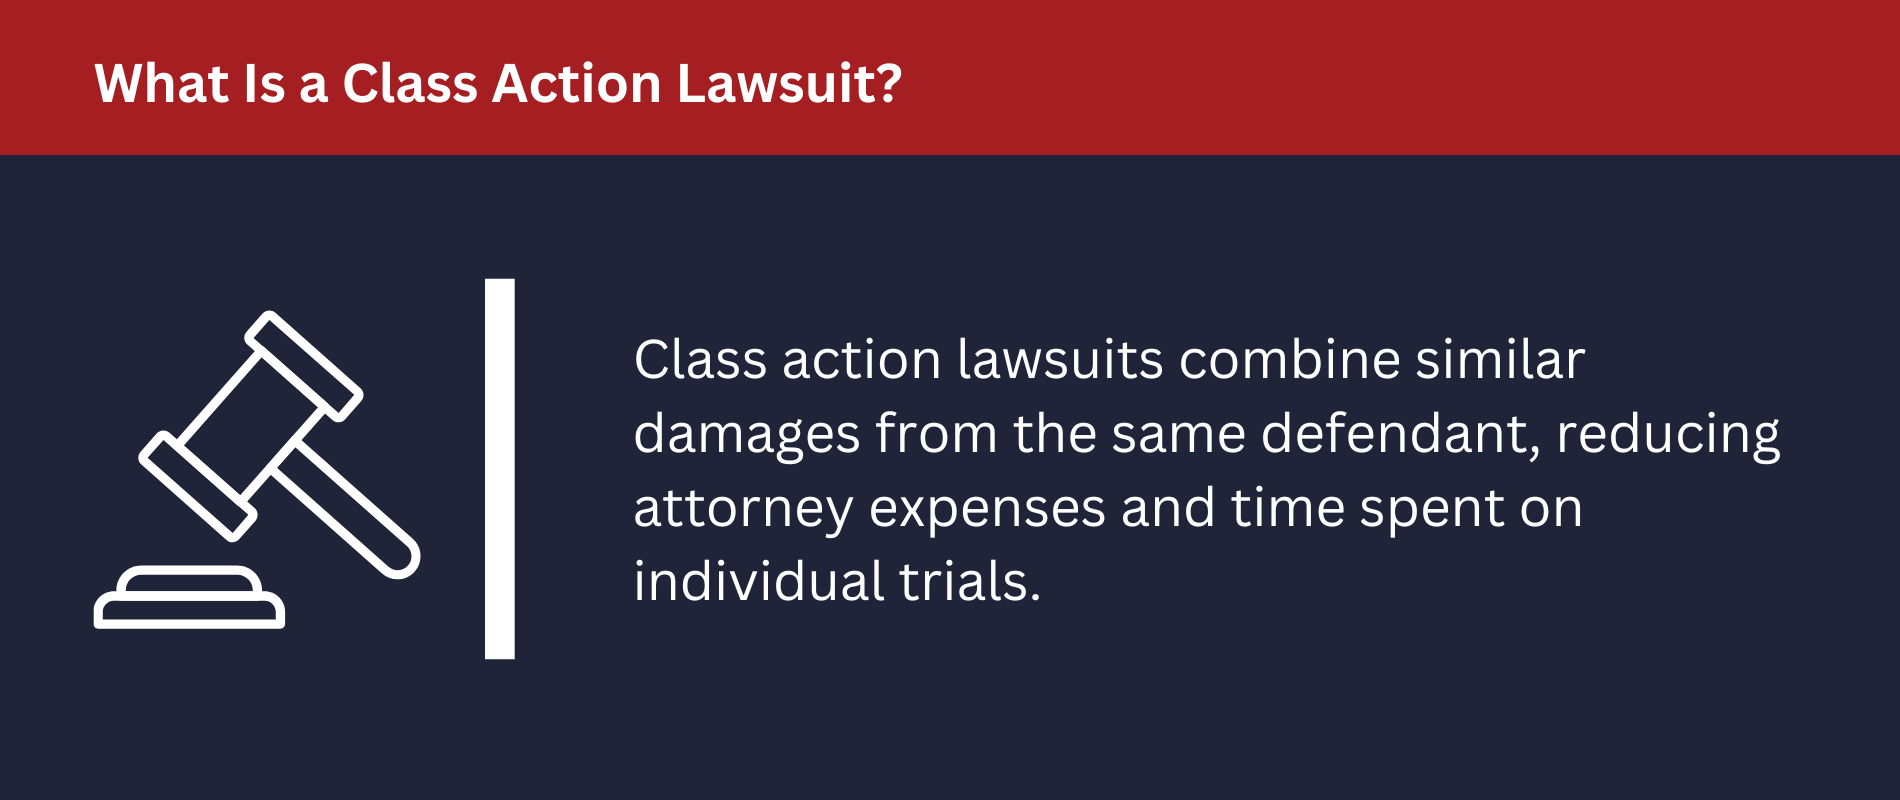 What Is a Class Action Lawsuit?